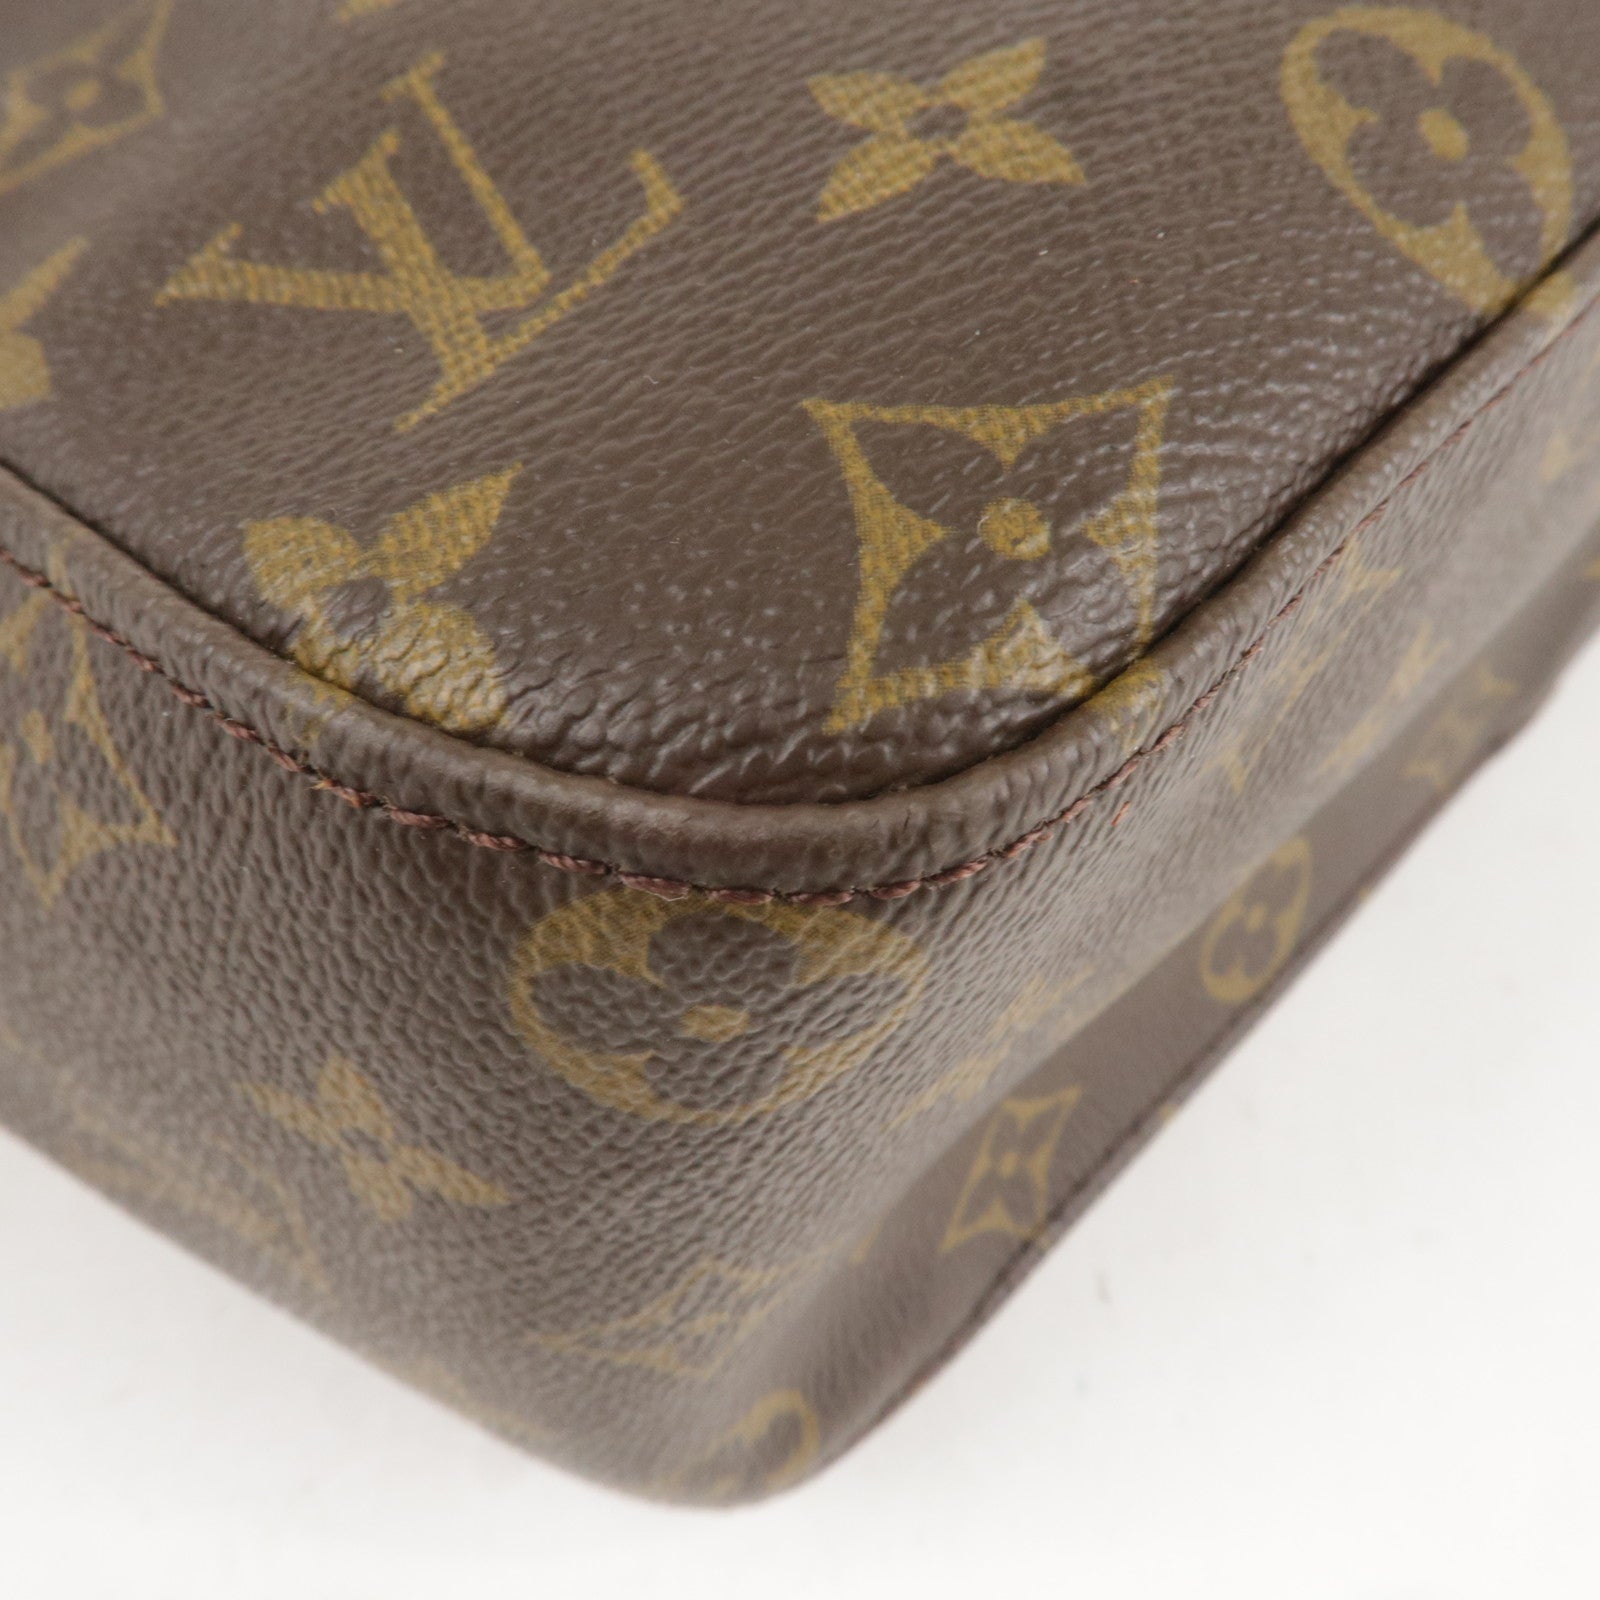 Louis Vuitton Looping GM M51145 – Timeless Vintage Company